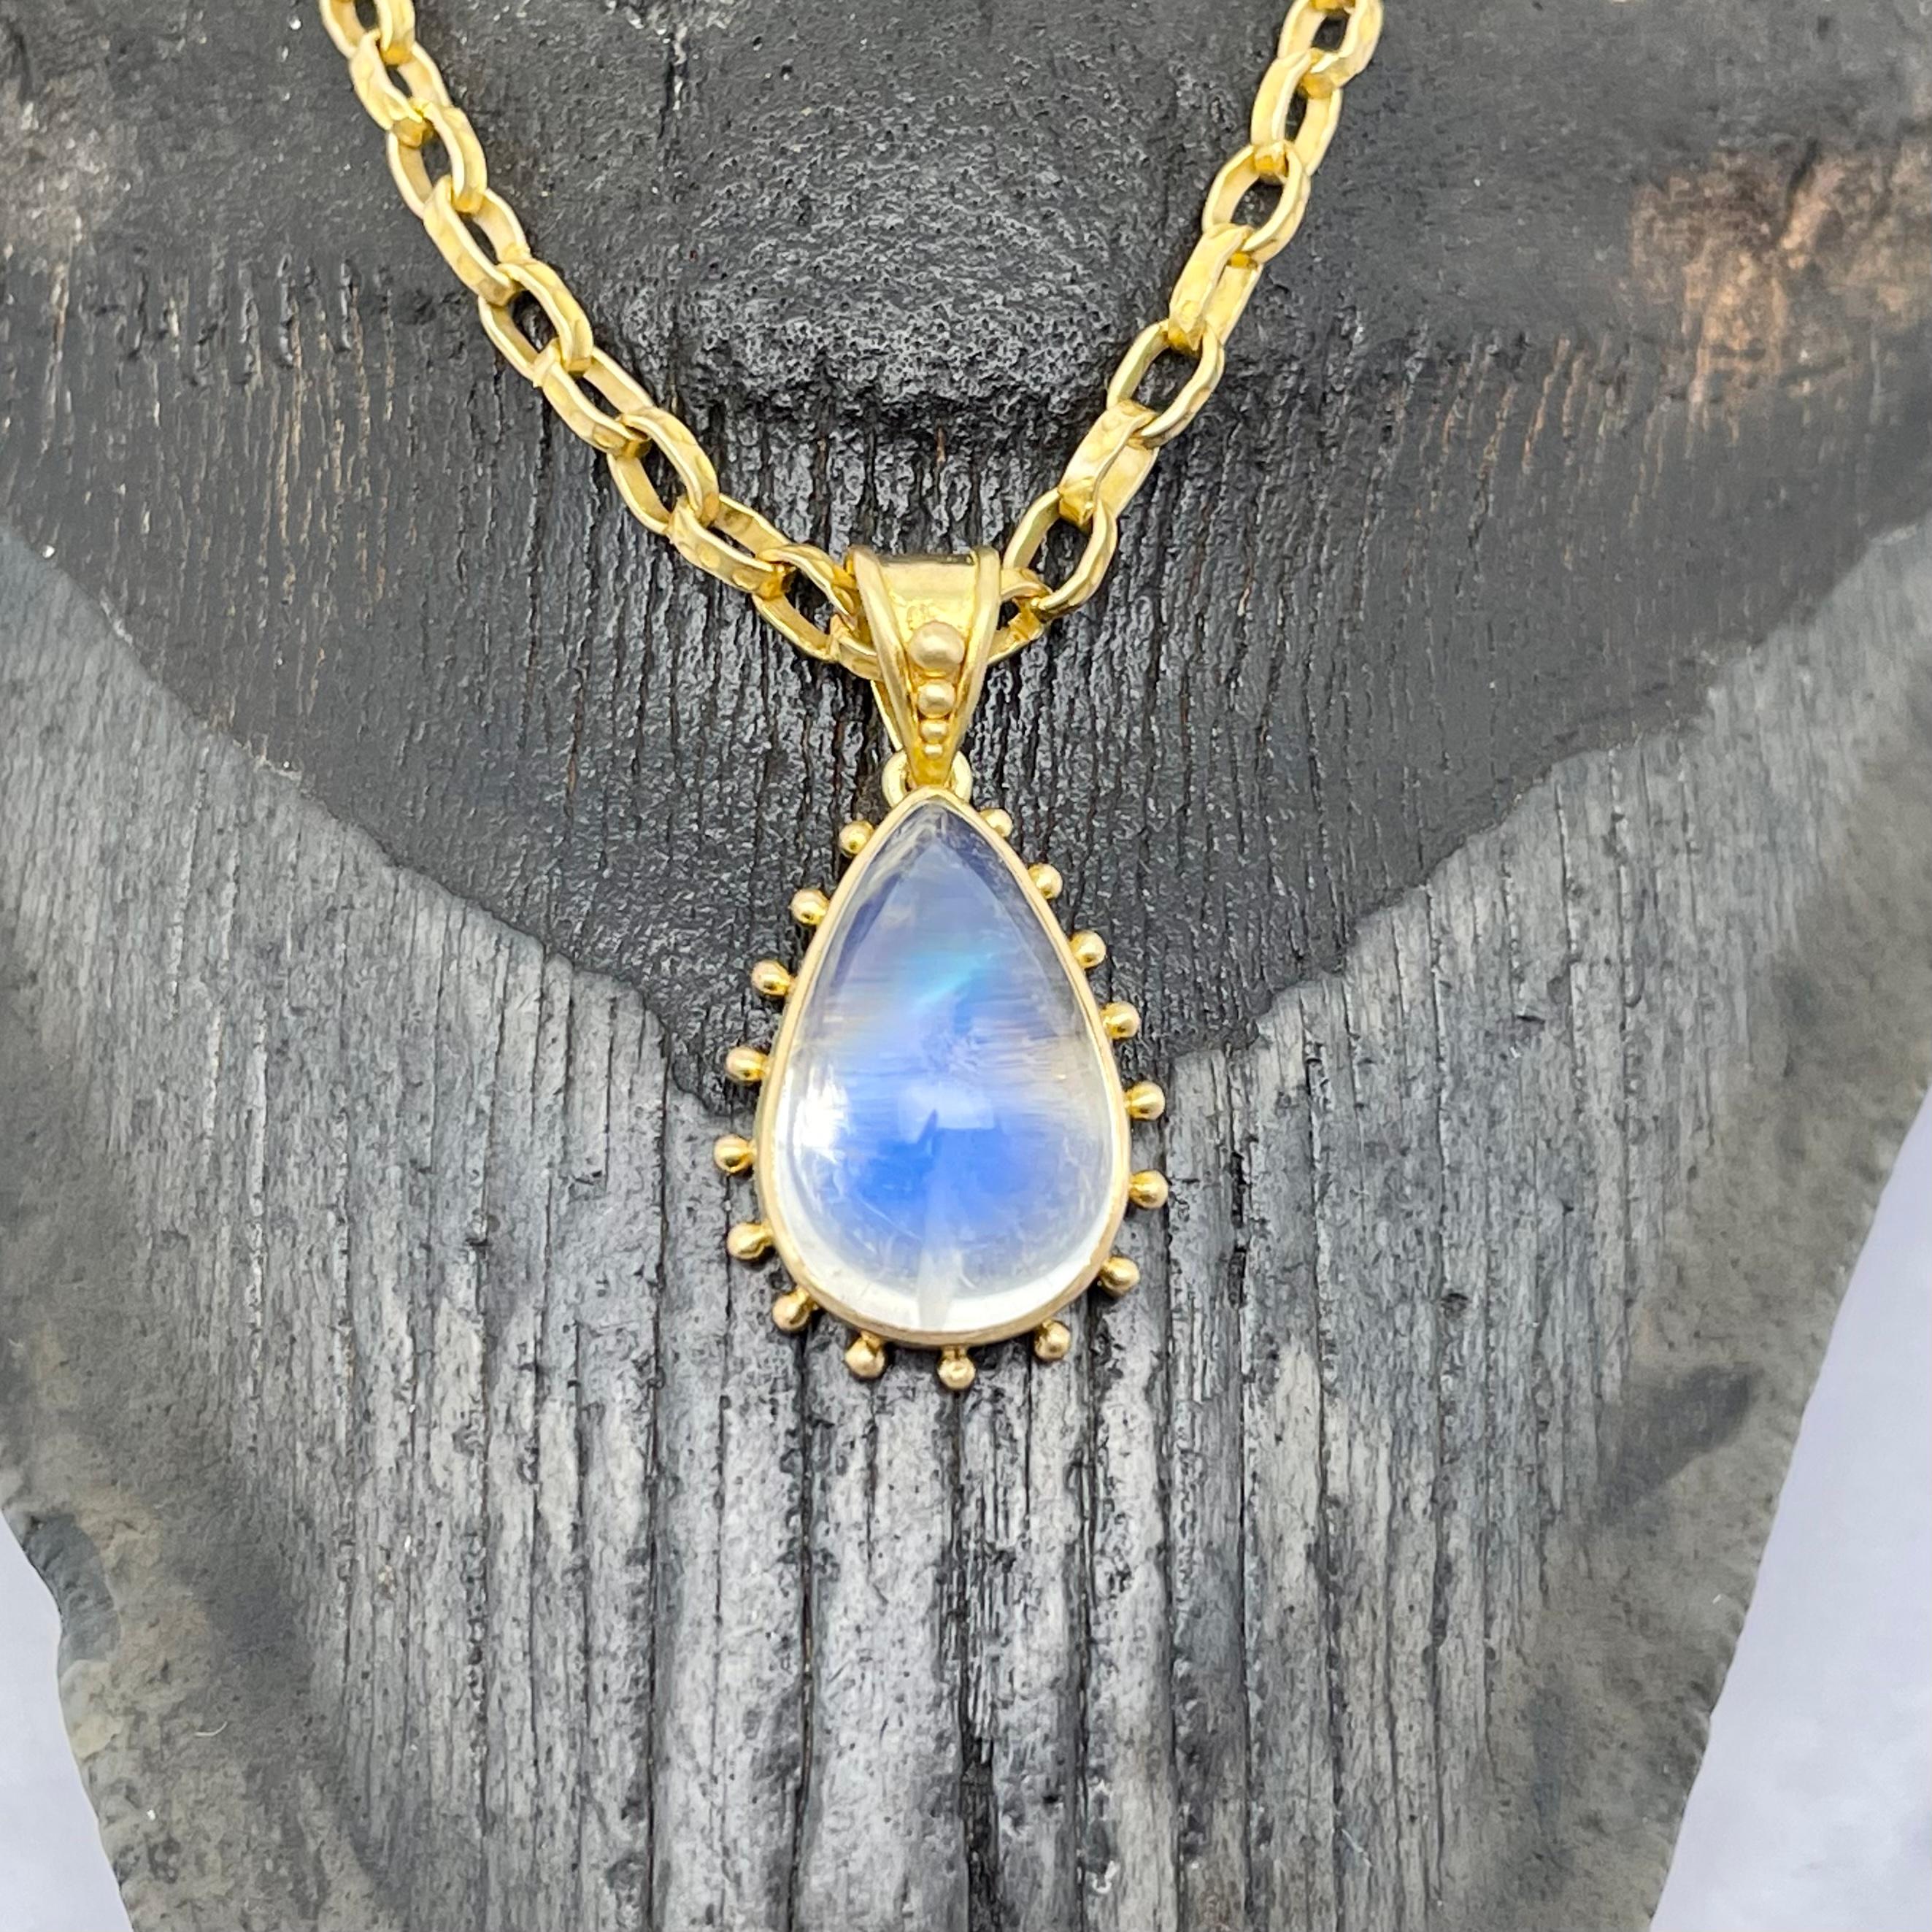 A long pear shaped 10 x 15 mm blue shimmering rainbow moonstone cabochon is set in a handmade bezel and surrounded by evenly spaced 